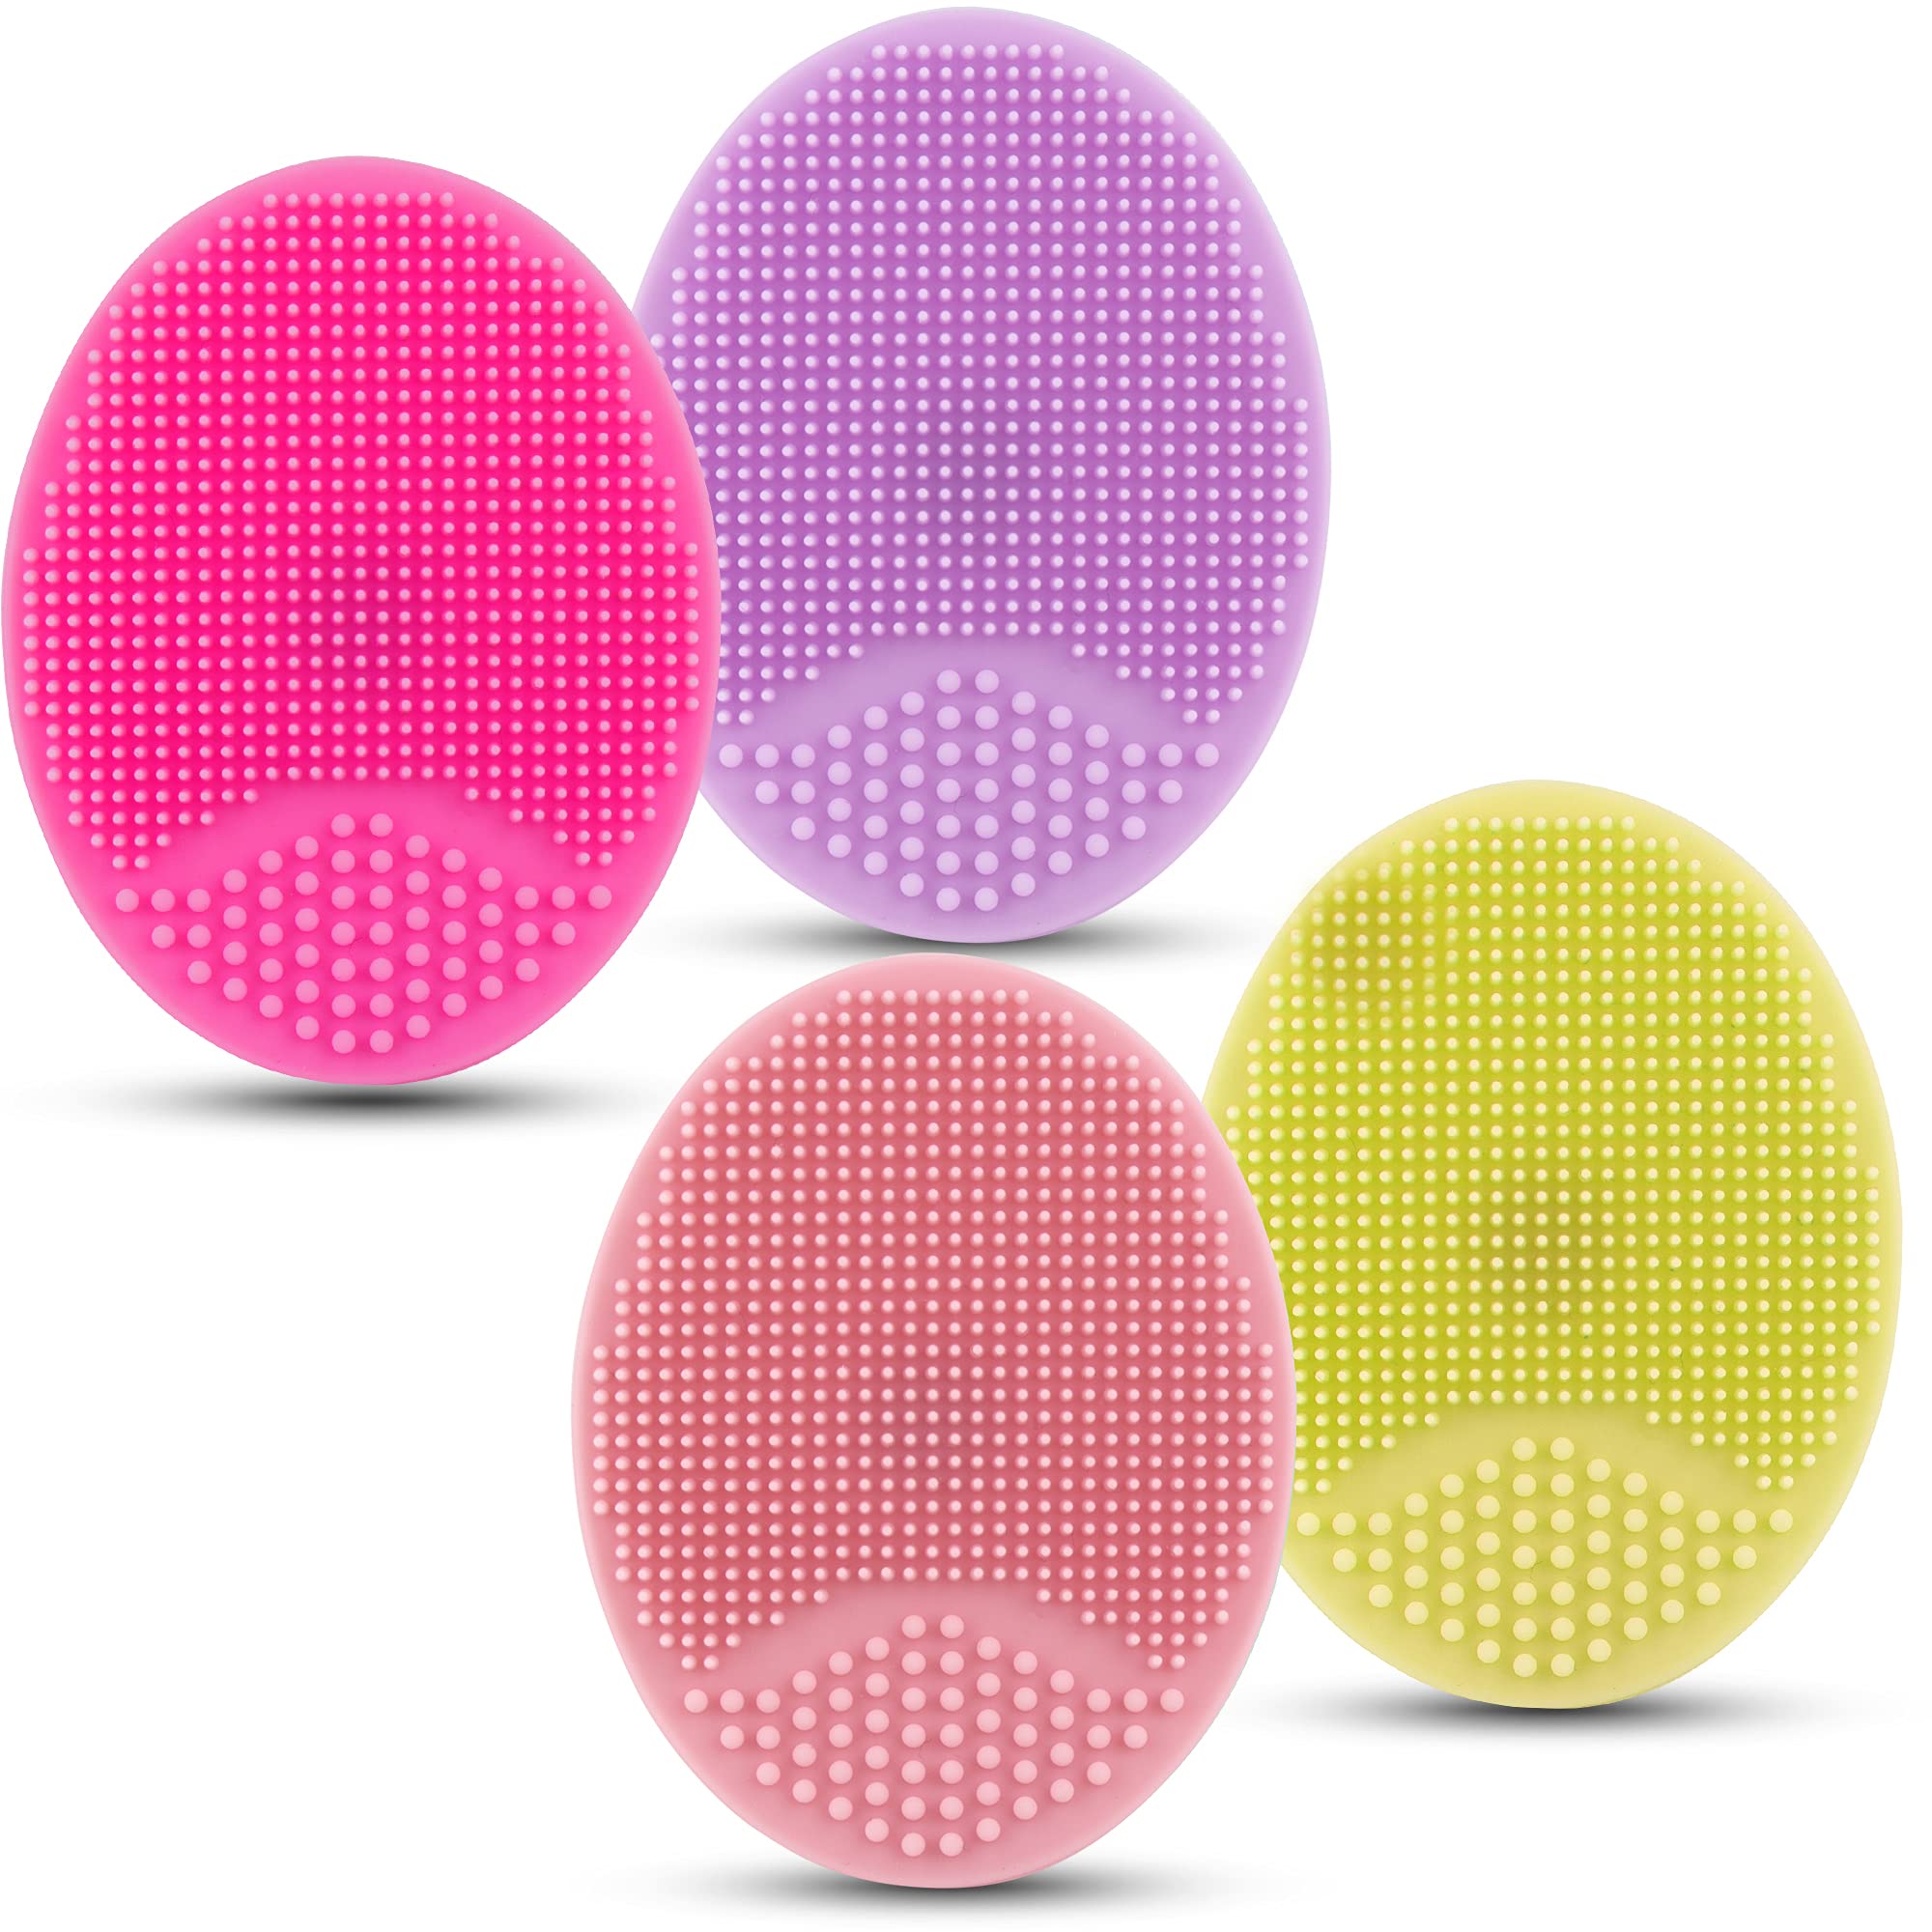 Facial Cleansing Brush Face Exfoliator Pad Silicone Face Scrubber, Mini Manual Silicone Face Scrubber Face Massager Brush Anti-Aging Skin Cleanser and Deep Exfoliator Makeup Tool for Girl Sister Women